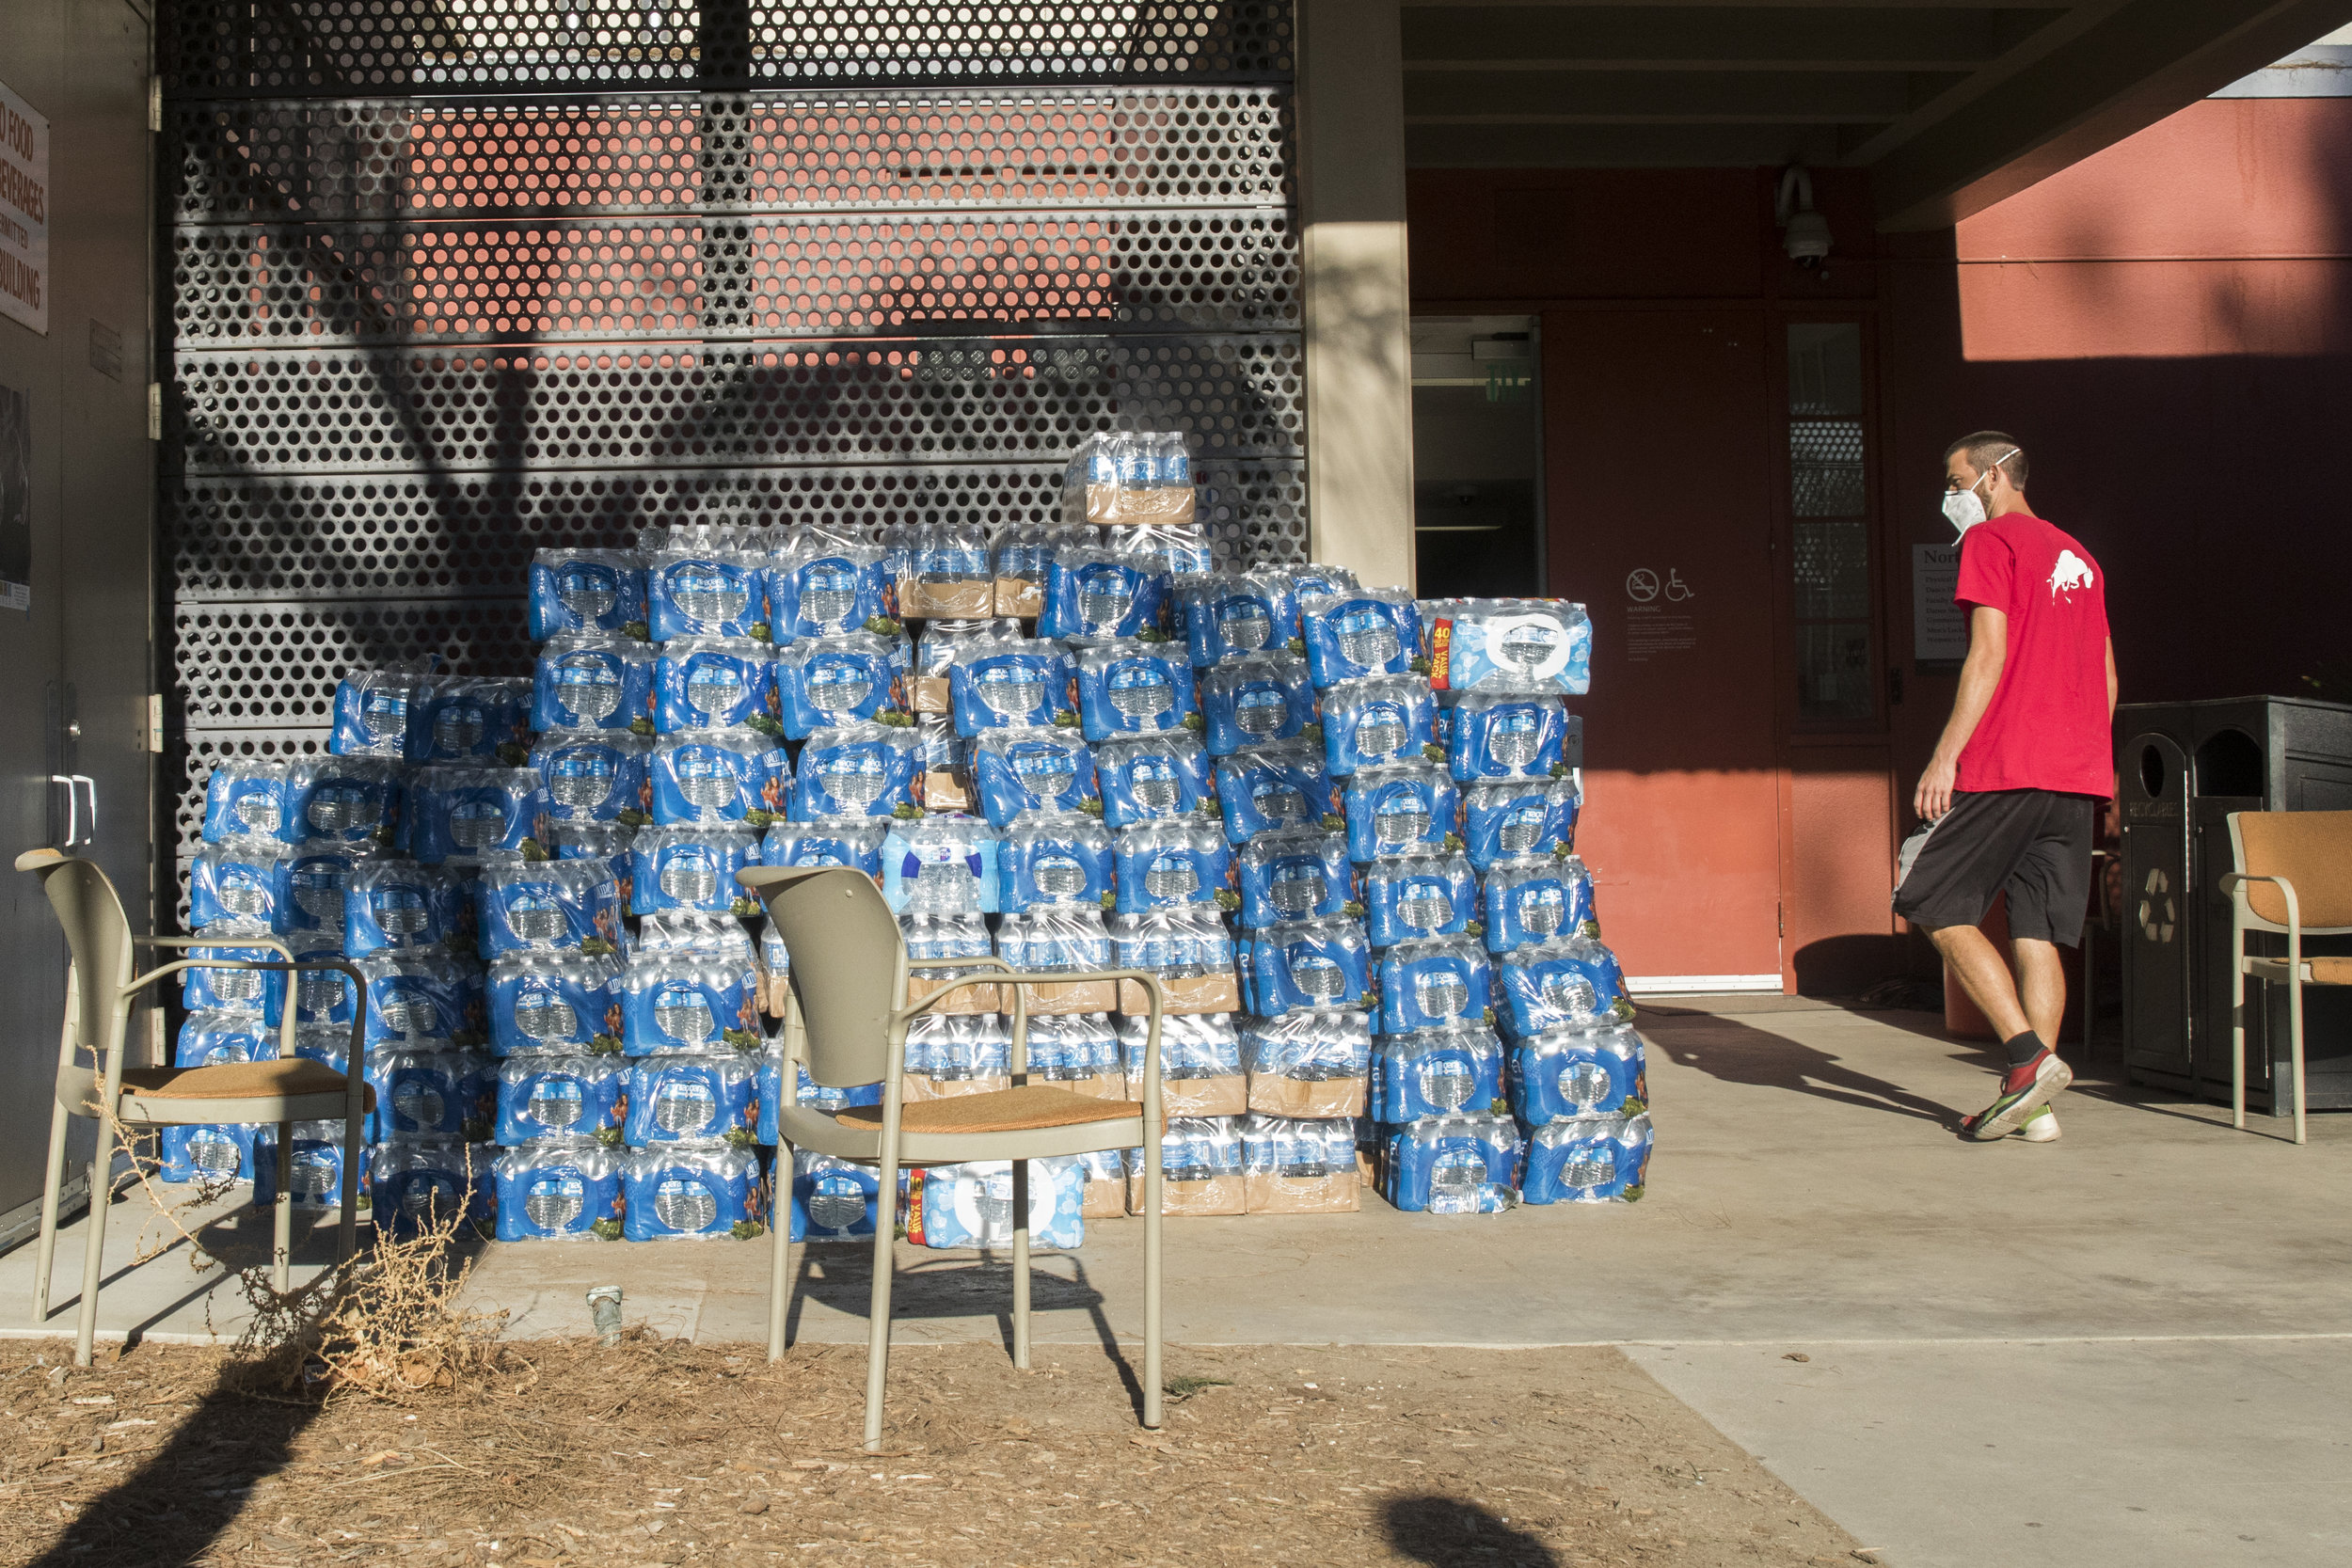  A volunteer walks by water bottles donated by Juan Mutaz (not pictured), a store manager for a Home Depot located in West Hills, California. The water bottles are readily available for any evacuee of the Woolsey Fire who have taken refuge at Pierce 